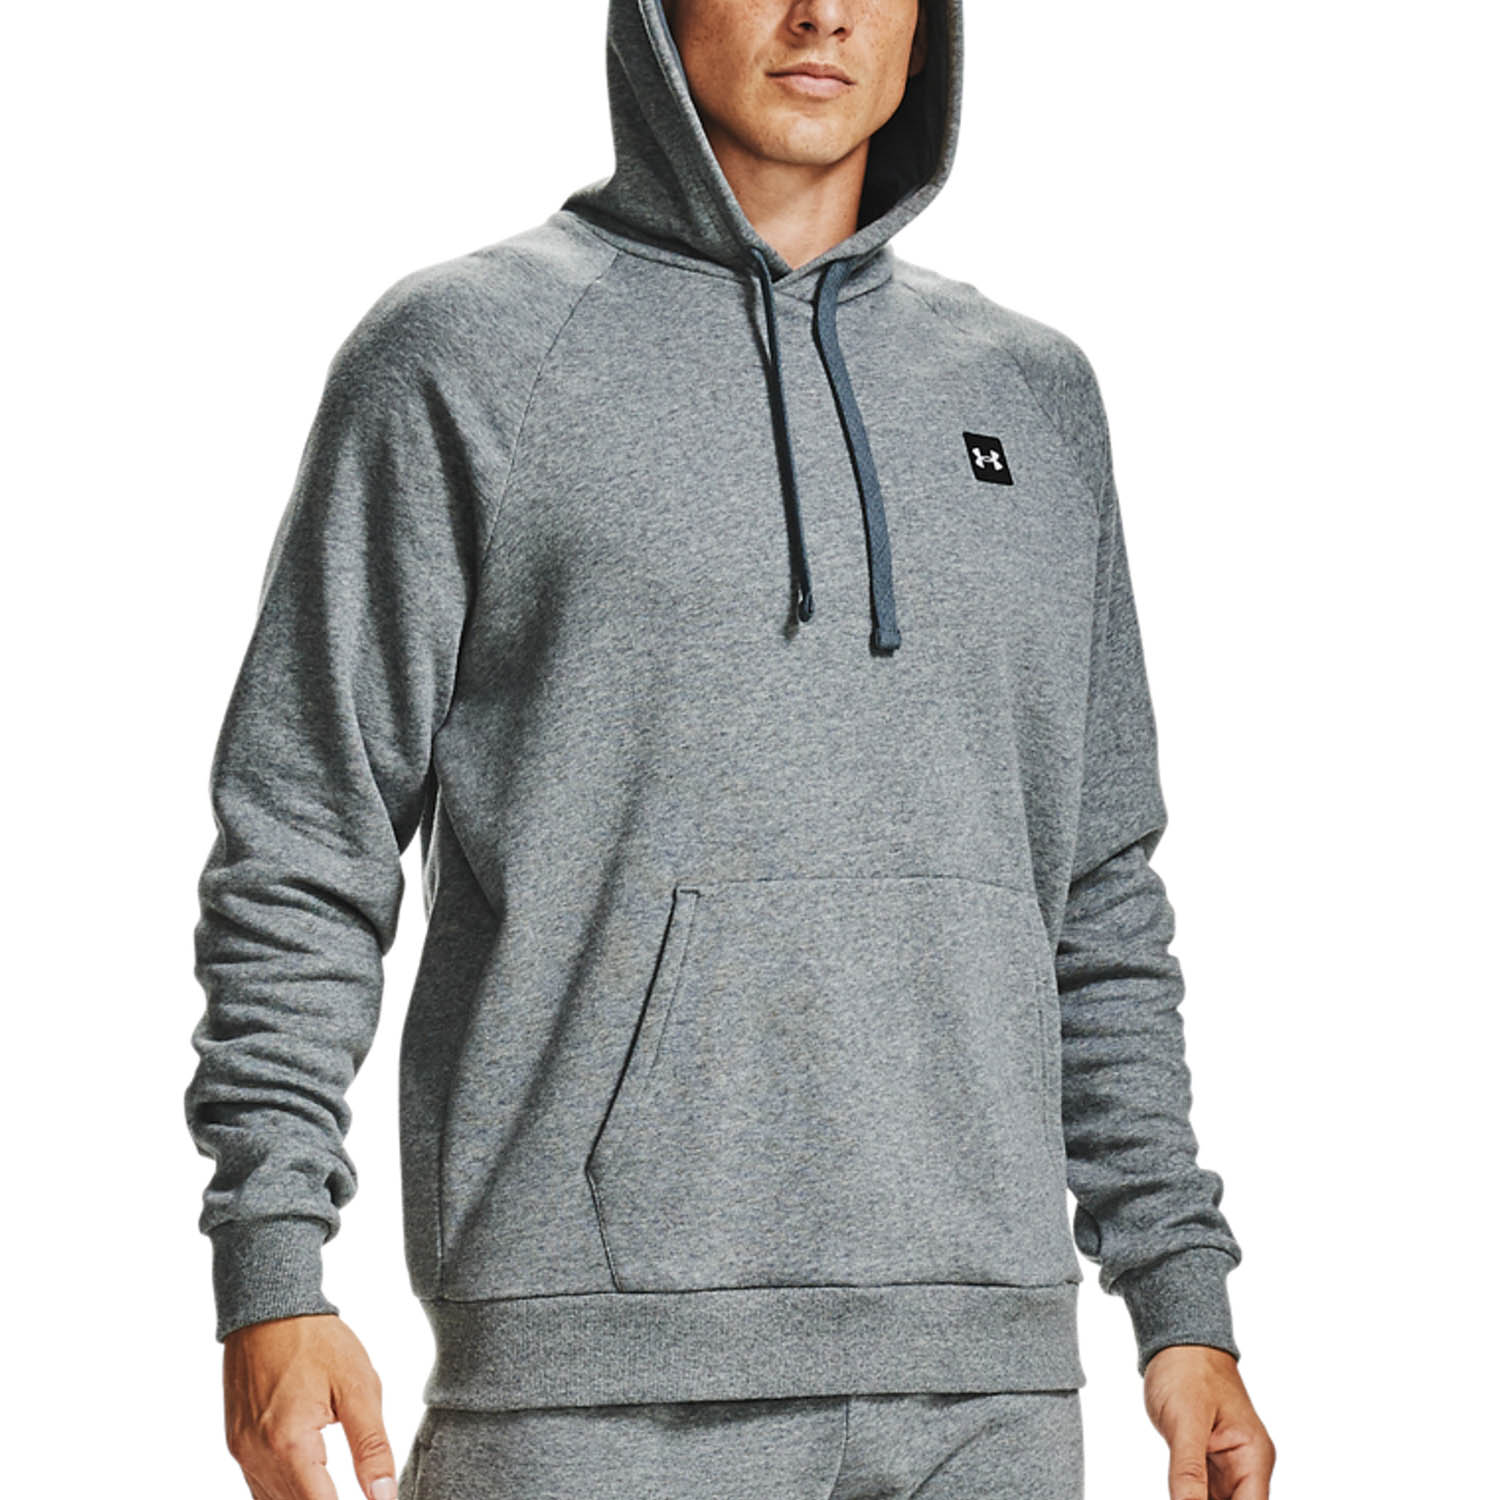 Under Armour Rival Fleece Hoodie - Pitch Gray Light Heather/Onyx White